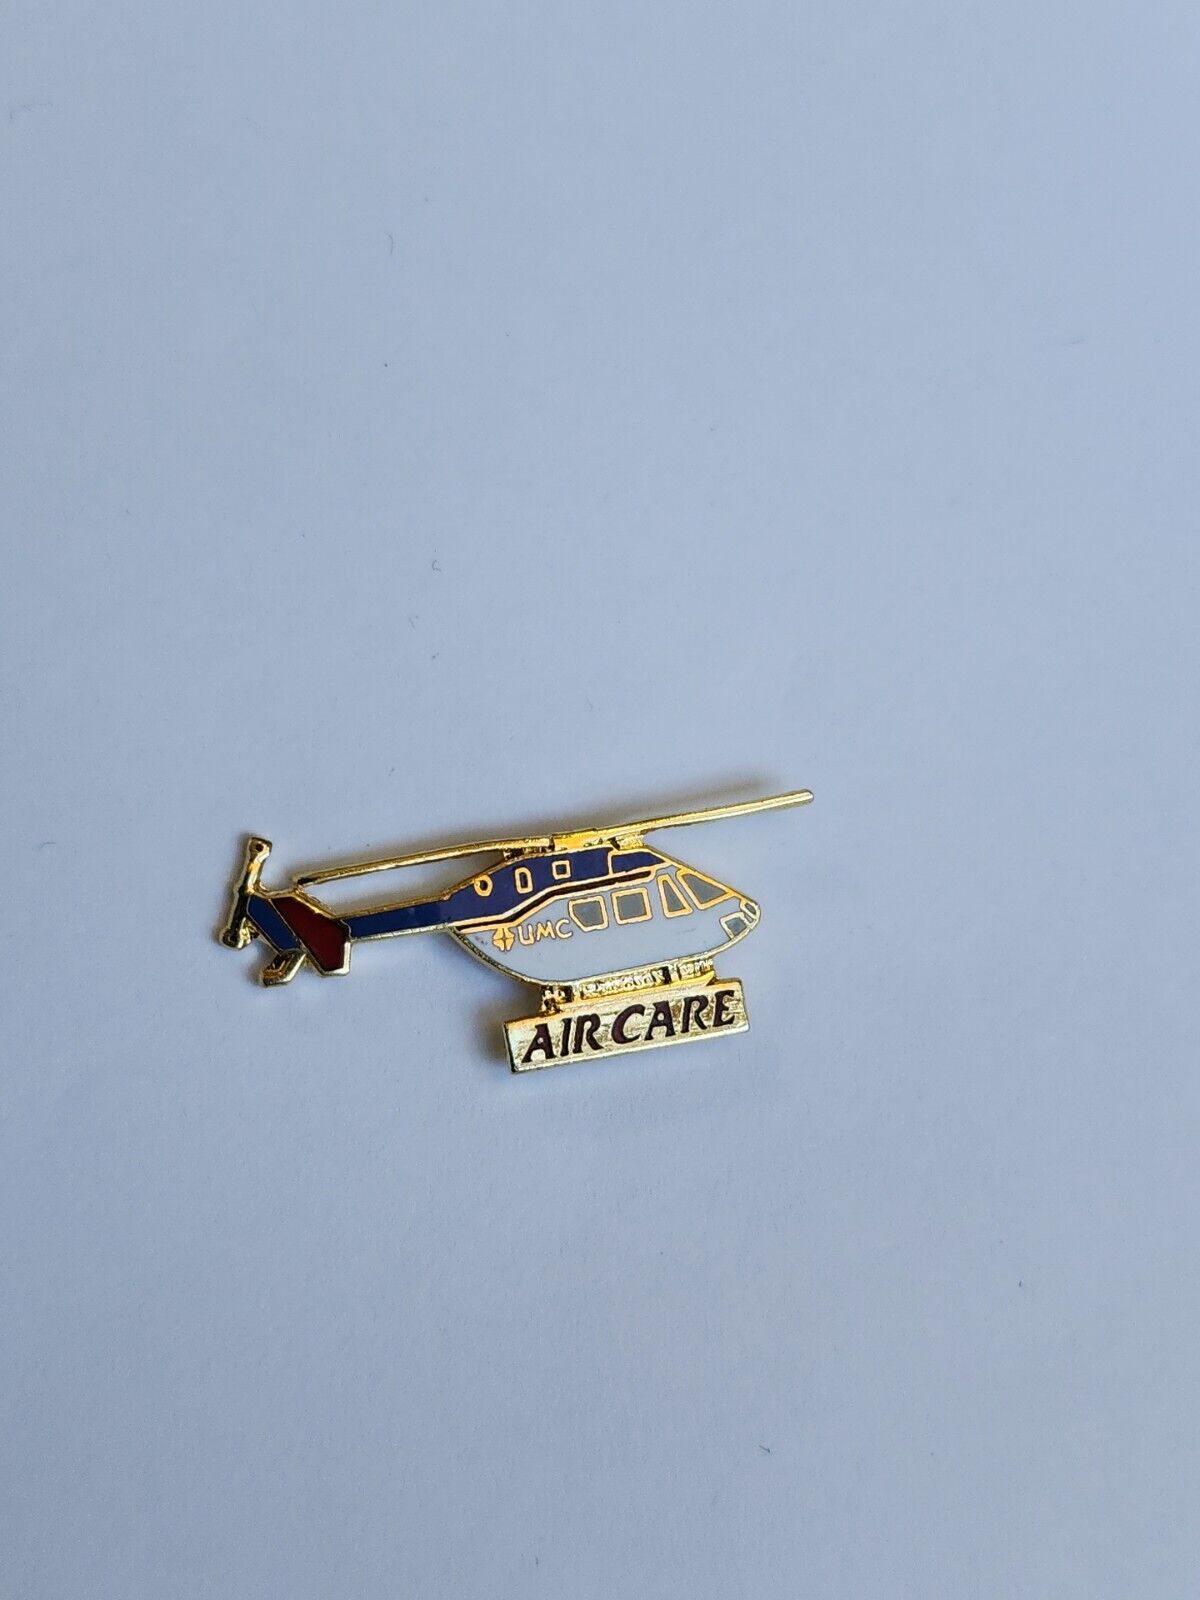 UMC Air Care Helicopter Pin University of Mississippi Medical Air Ambulance